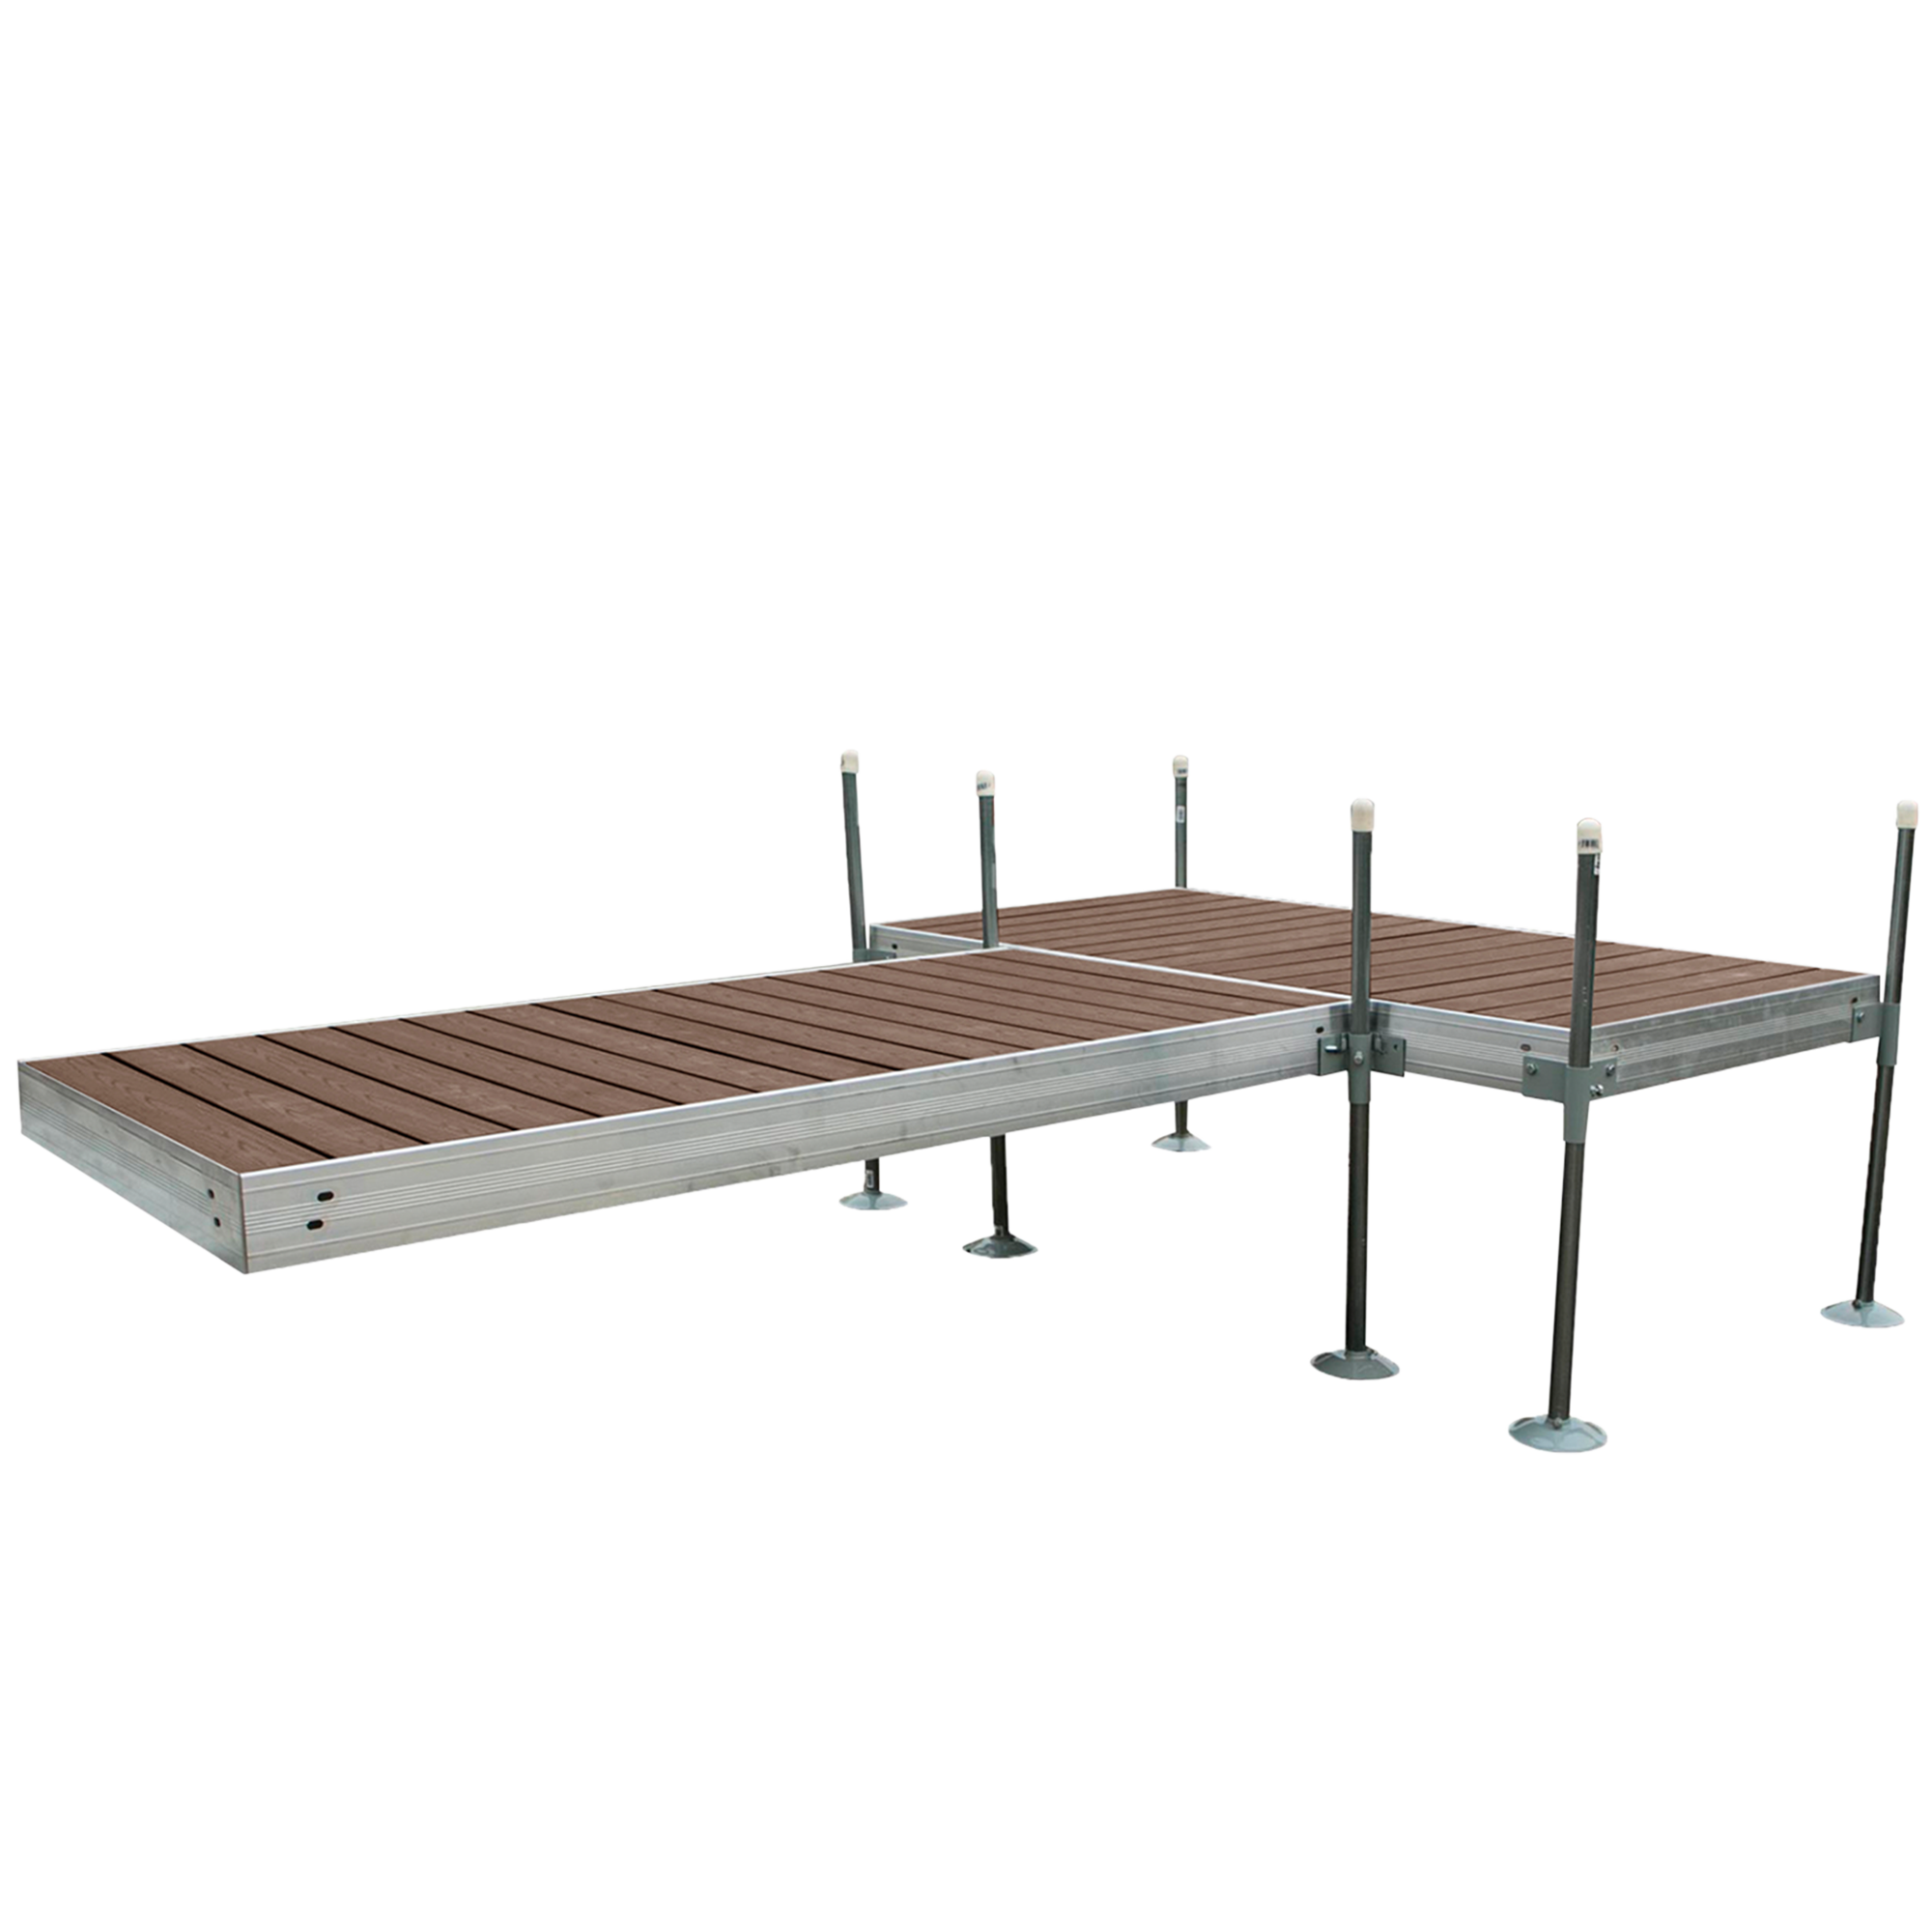 12' T-Shaped Boat Dock System with Aluminum Frame and Brown Composite Decking